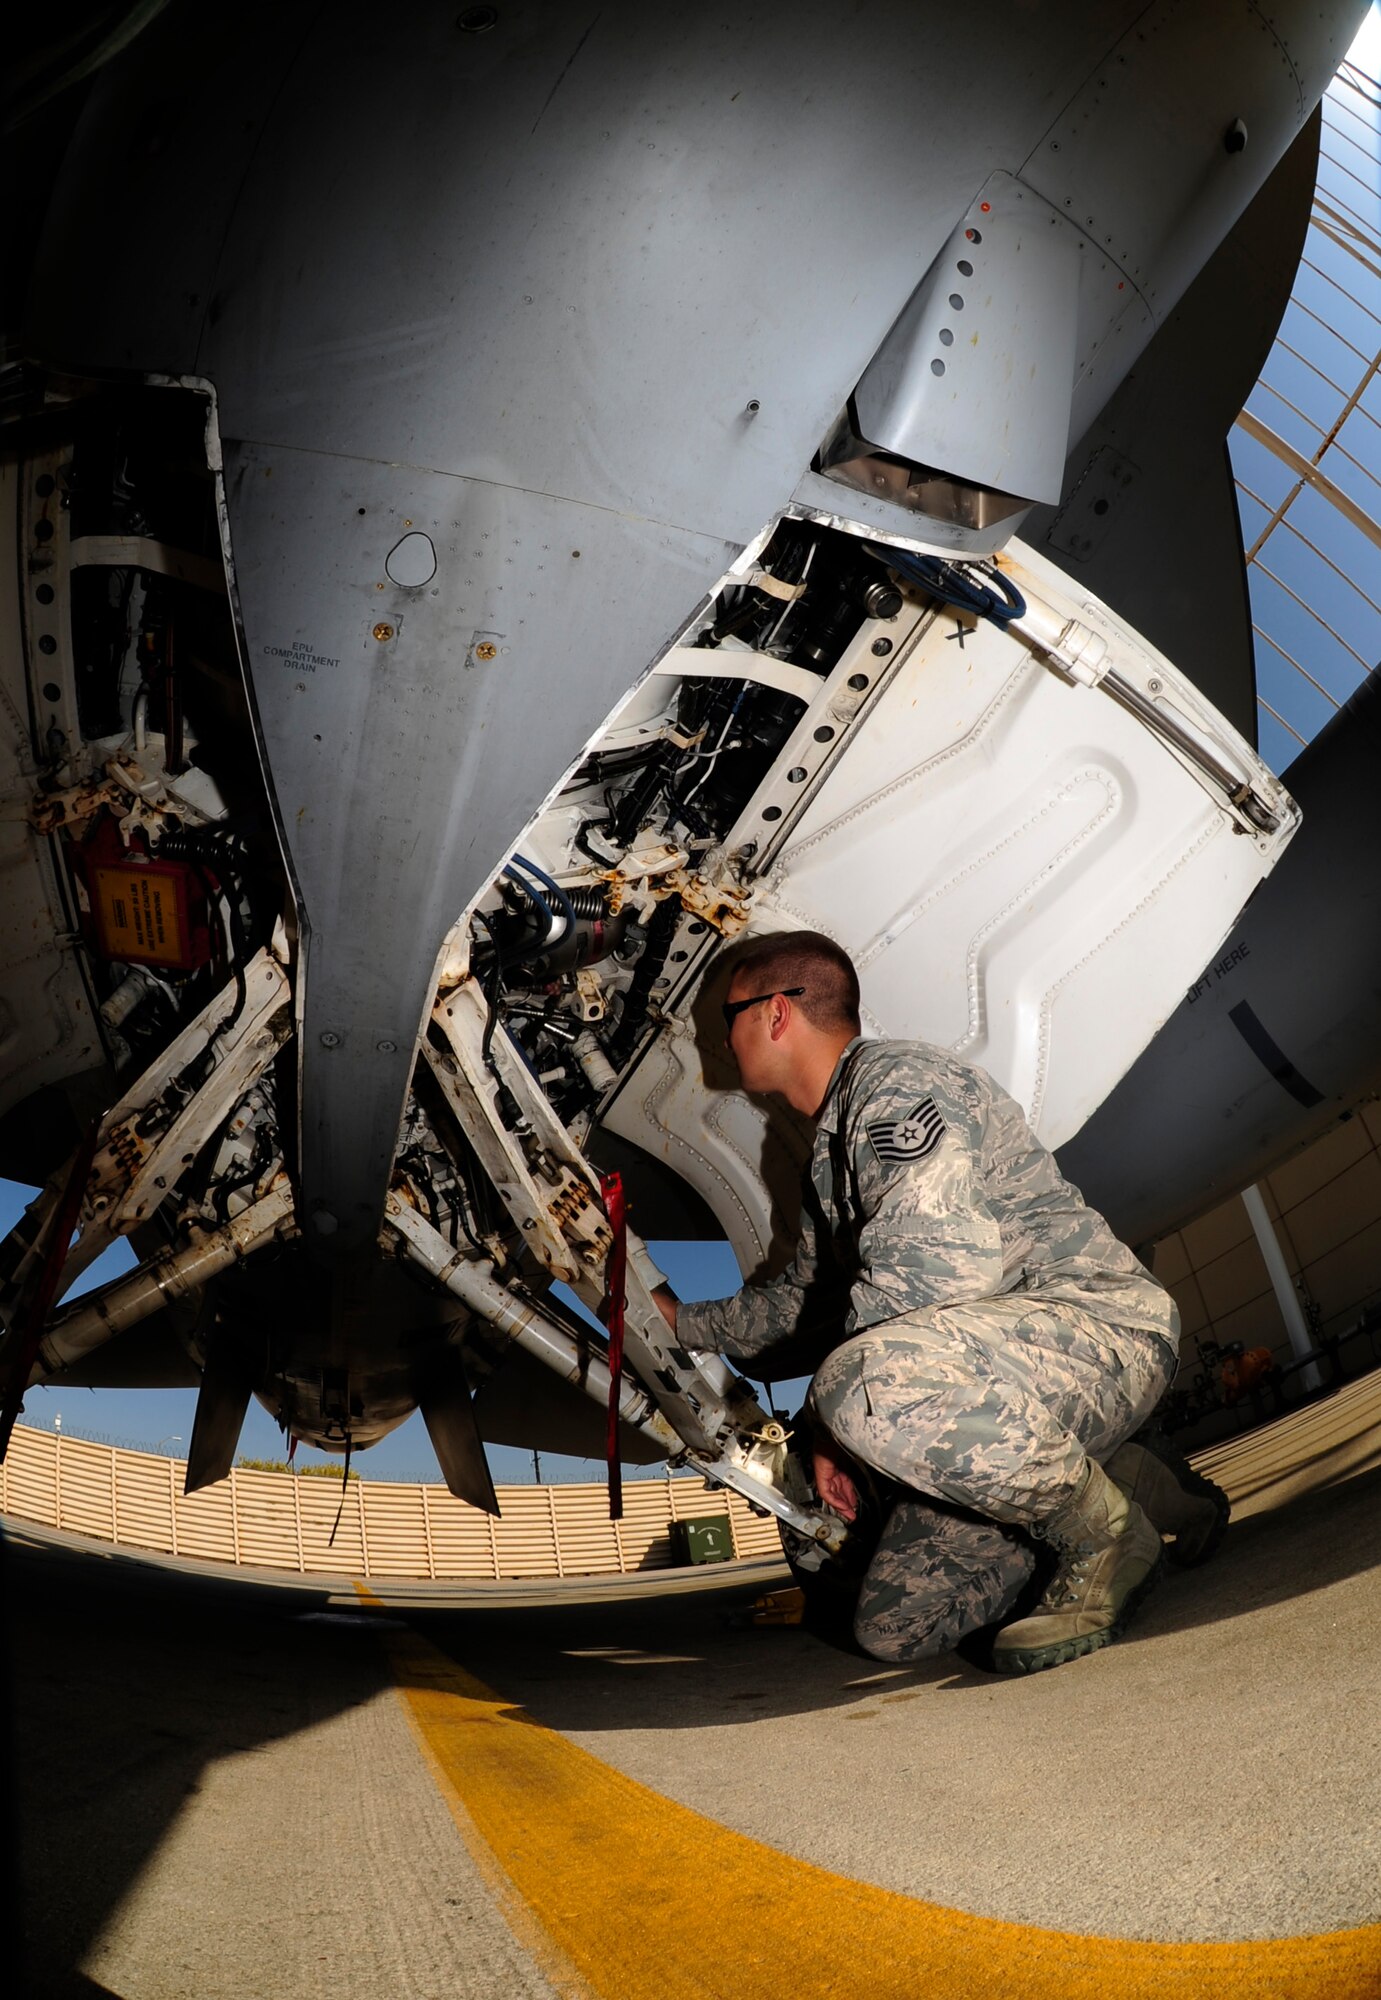 U.S. Air Force Tech. Sgt. Brett Larson, 134th Expeditionary Fighter Squadron F-16 Fighting Falcon crew chief, Vermont Air National Guard, inspects the landing gear of an F-16 at Kunsan Air Base, Republic of Korea, Oct. 6, 2015. The 134th EFS was redeployed from Kadena Air Base, Japan to Kunsan AB as part of a theater security package. TSP deployments provide the Asia-Pacific Region with forces capable of a variety of operations, including access to the global commons, disaster relief, global situational awareness, combating piracy, active defense and power projection. (U.S. Air Force photo by Staff Sgt. Nick Wilson/Released) 